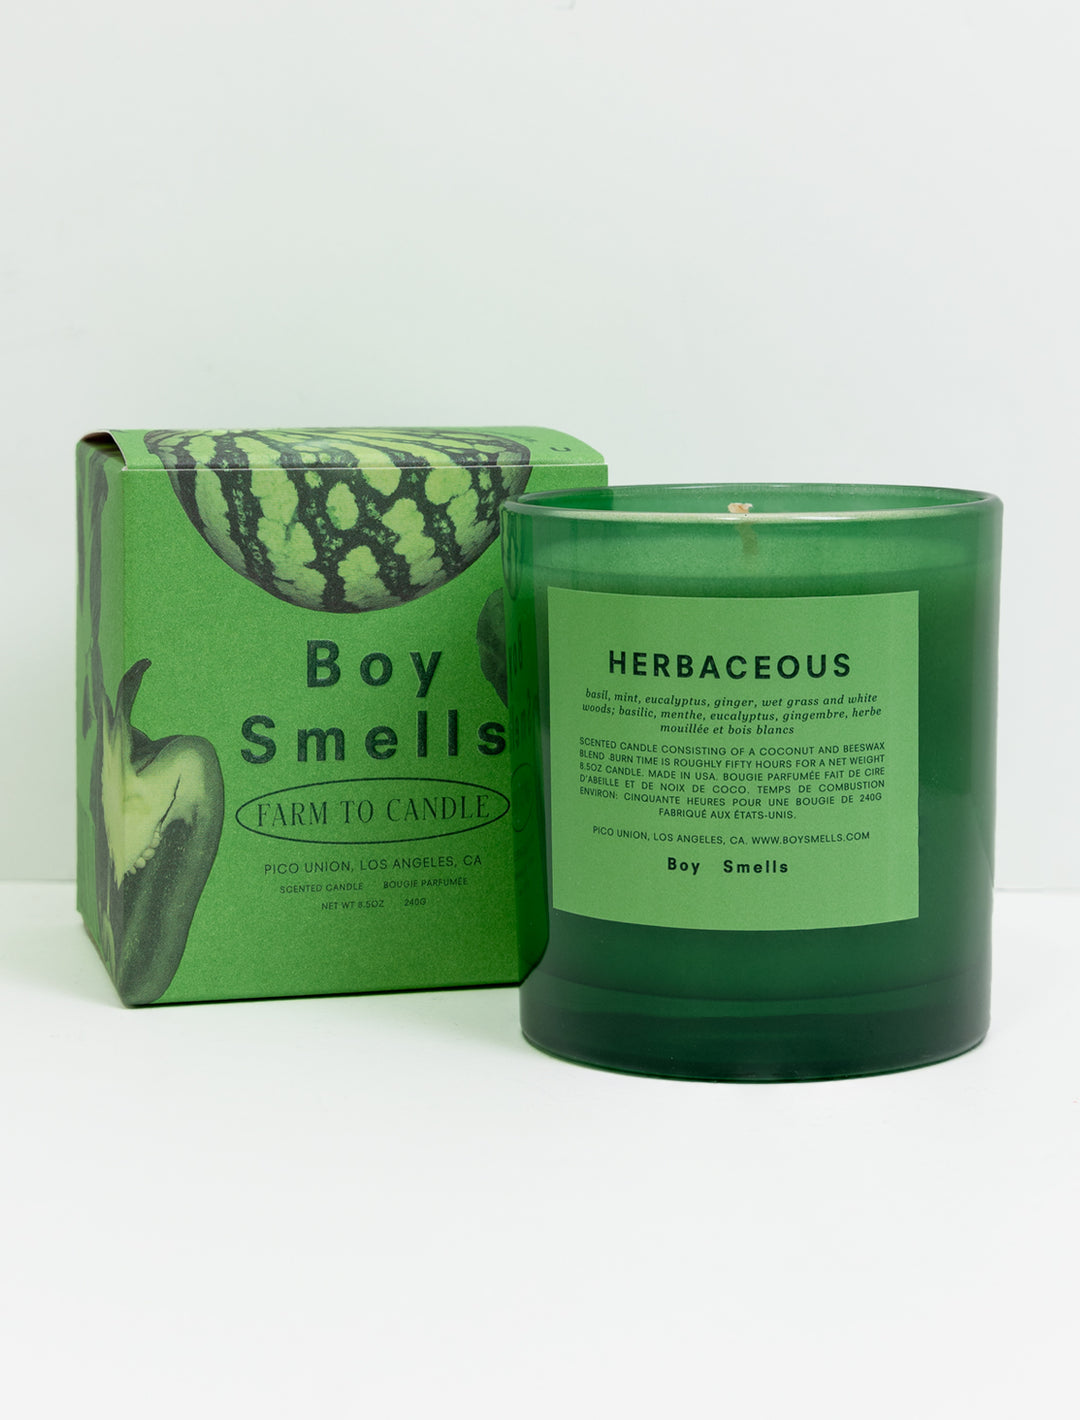 Product packaging of Boy Smells' farm to candle | herbaceous.